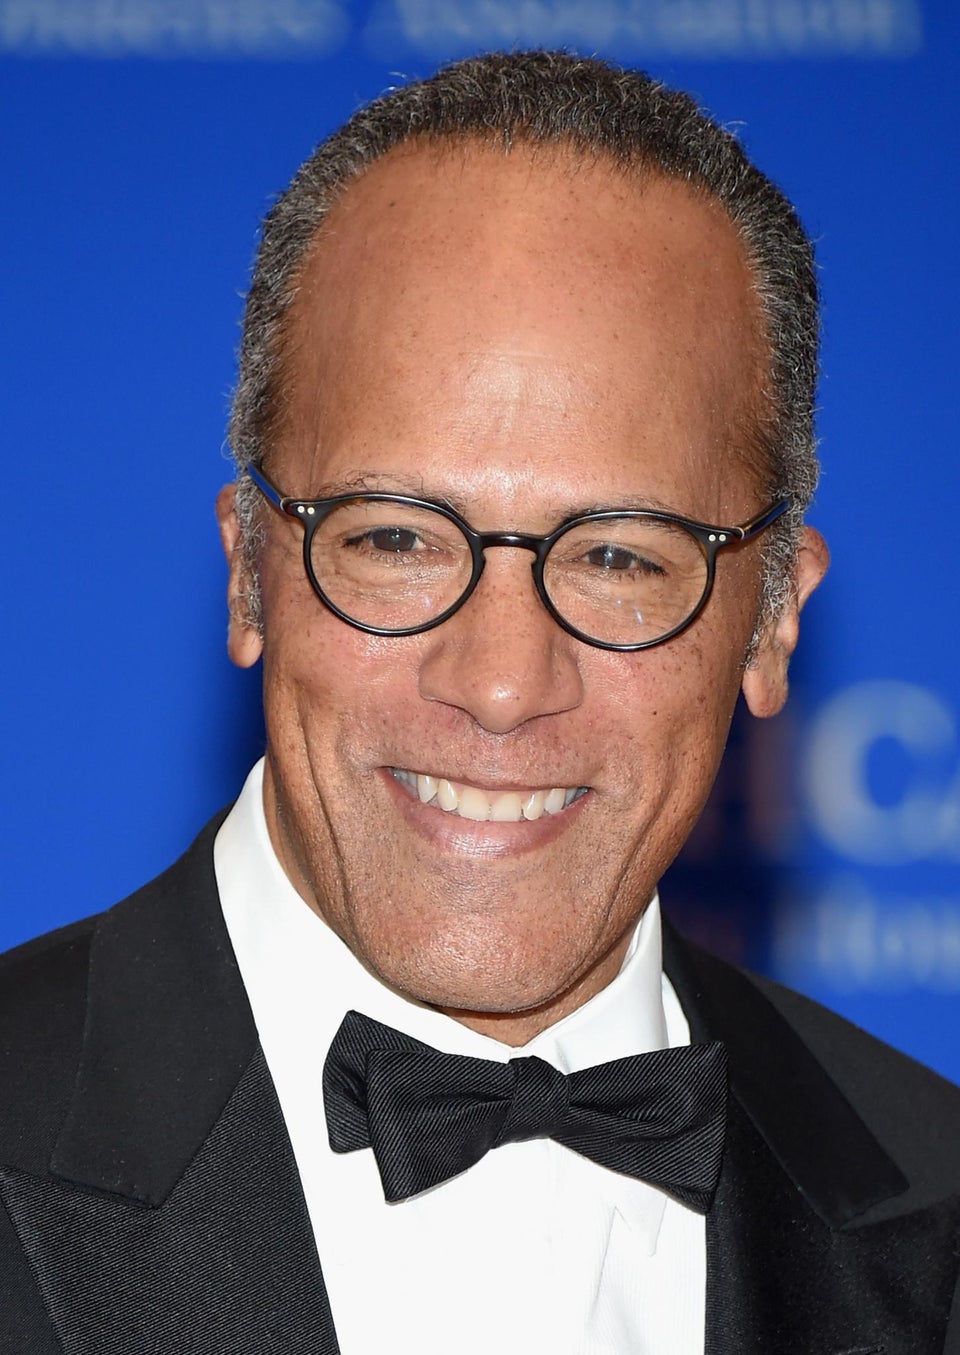 NBC Nightly News’ Lester Holt: ‘You Should Be Able to Turn on the TV and See People Who Look Like Those in Your Community’